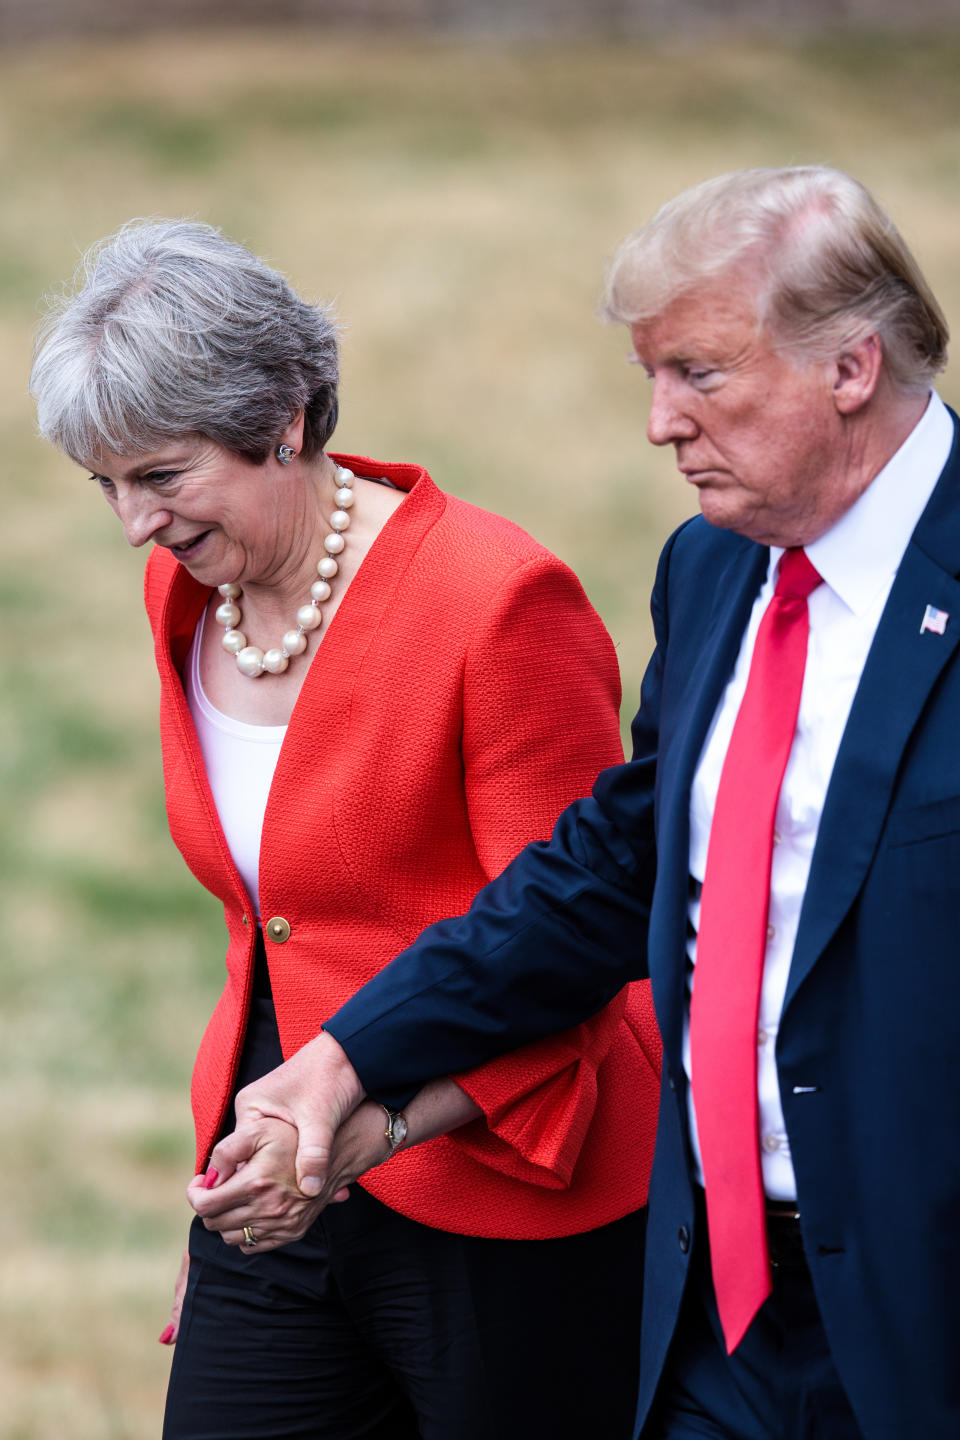 President Trump held British Prime Minister Theresa May’s hand on the way to a meeting. (Photo: Getty Images)